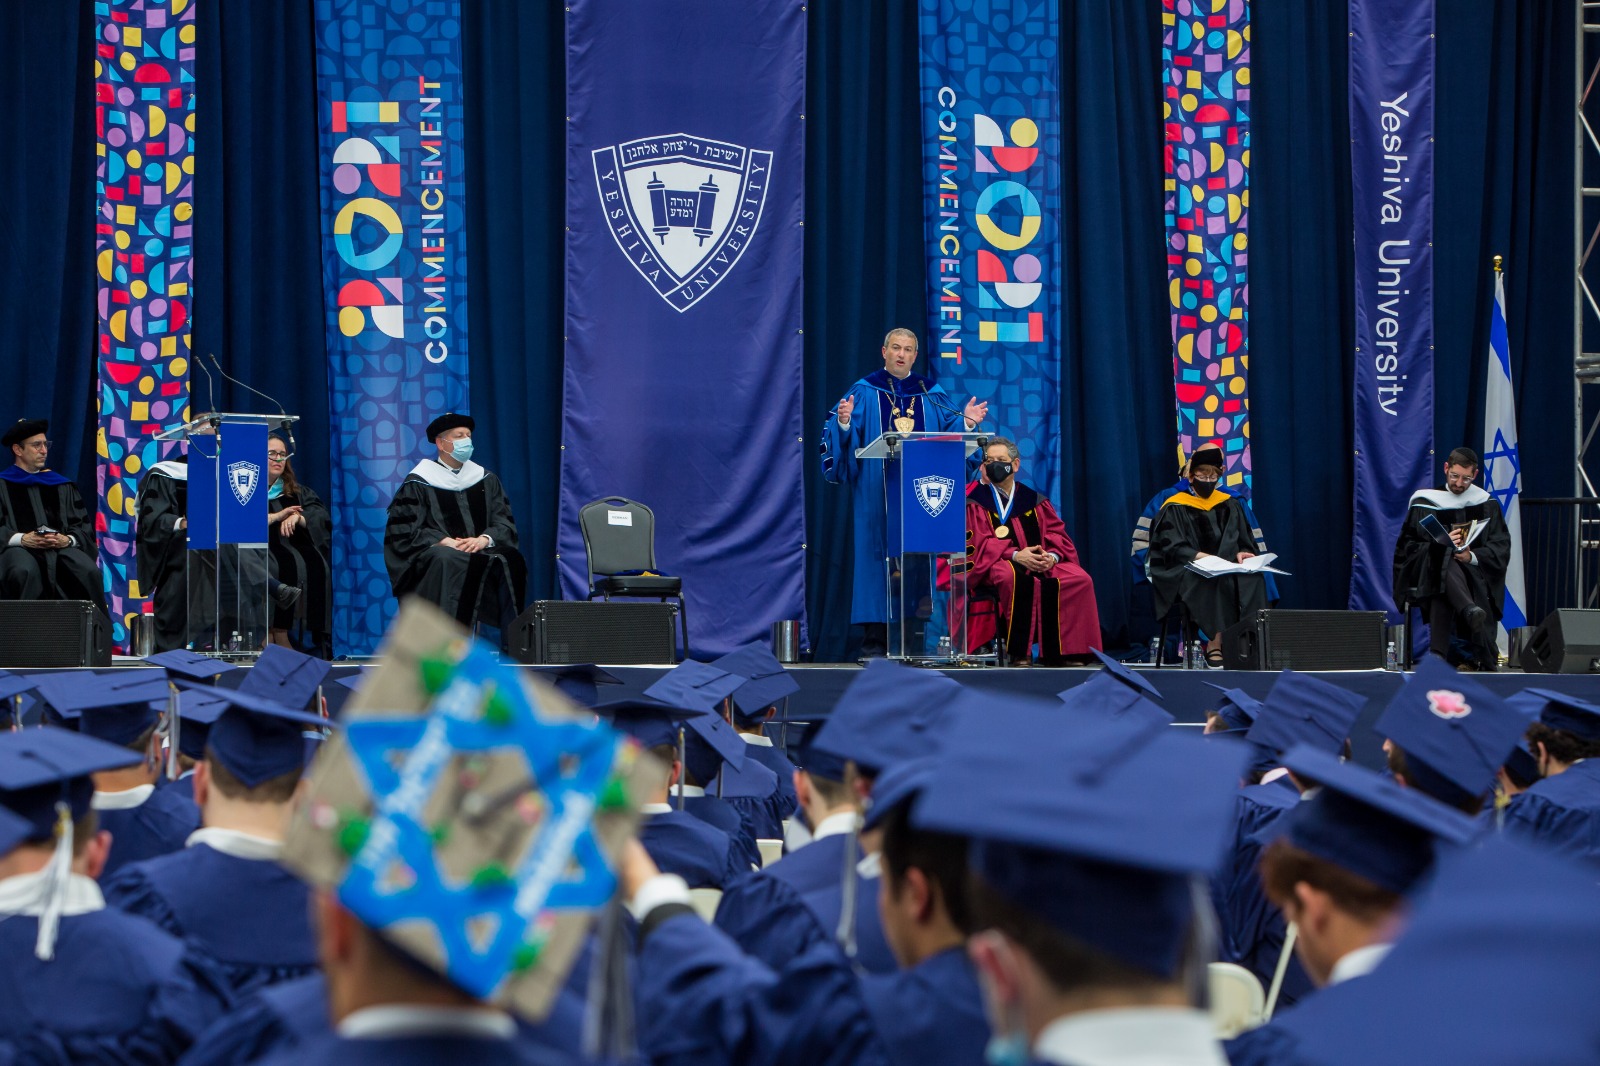 Emerging Even Stronger Yeshiva University Conducts Commencement